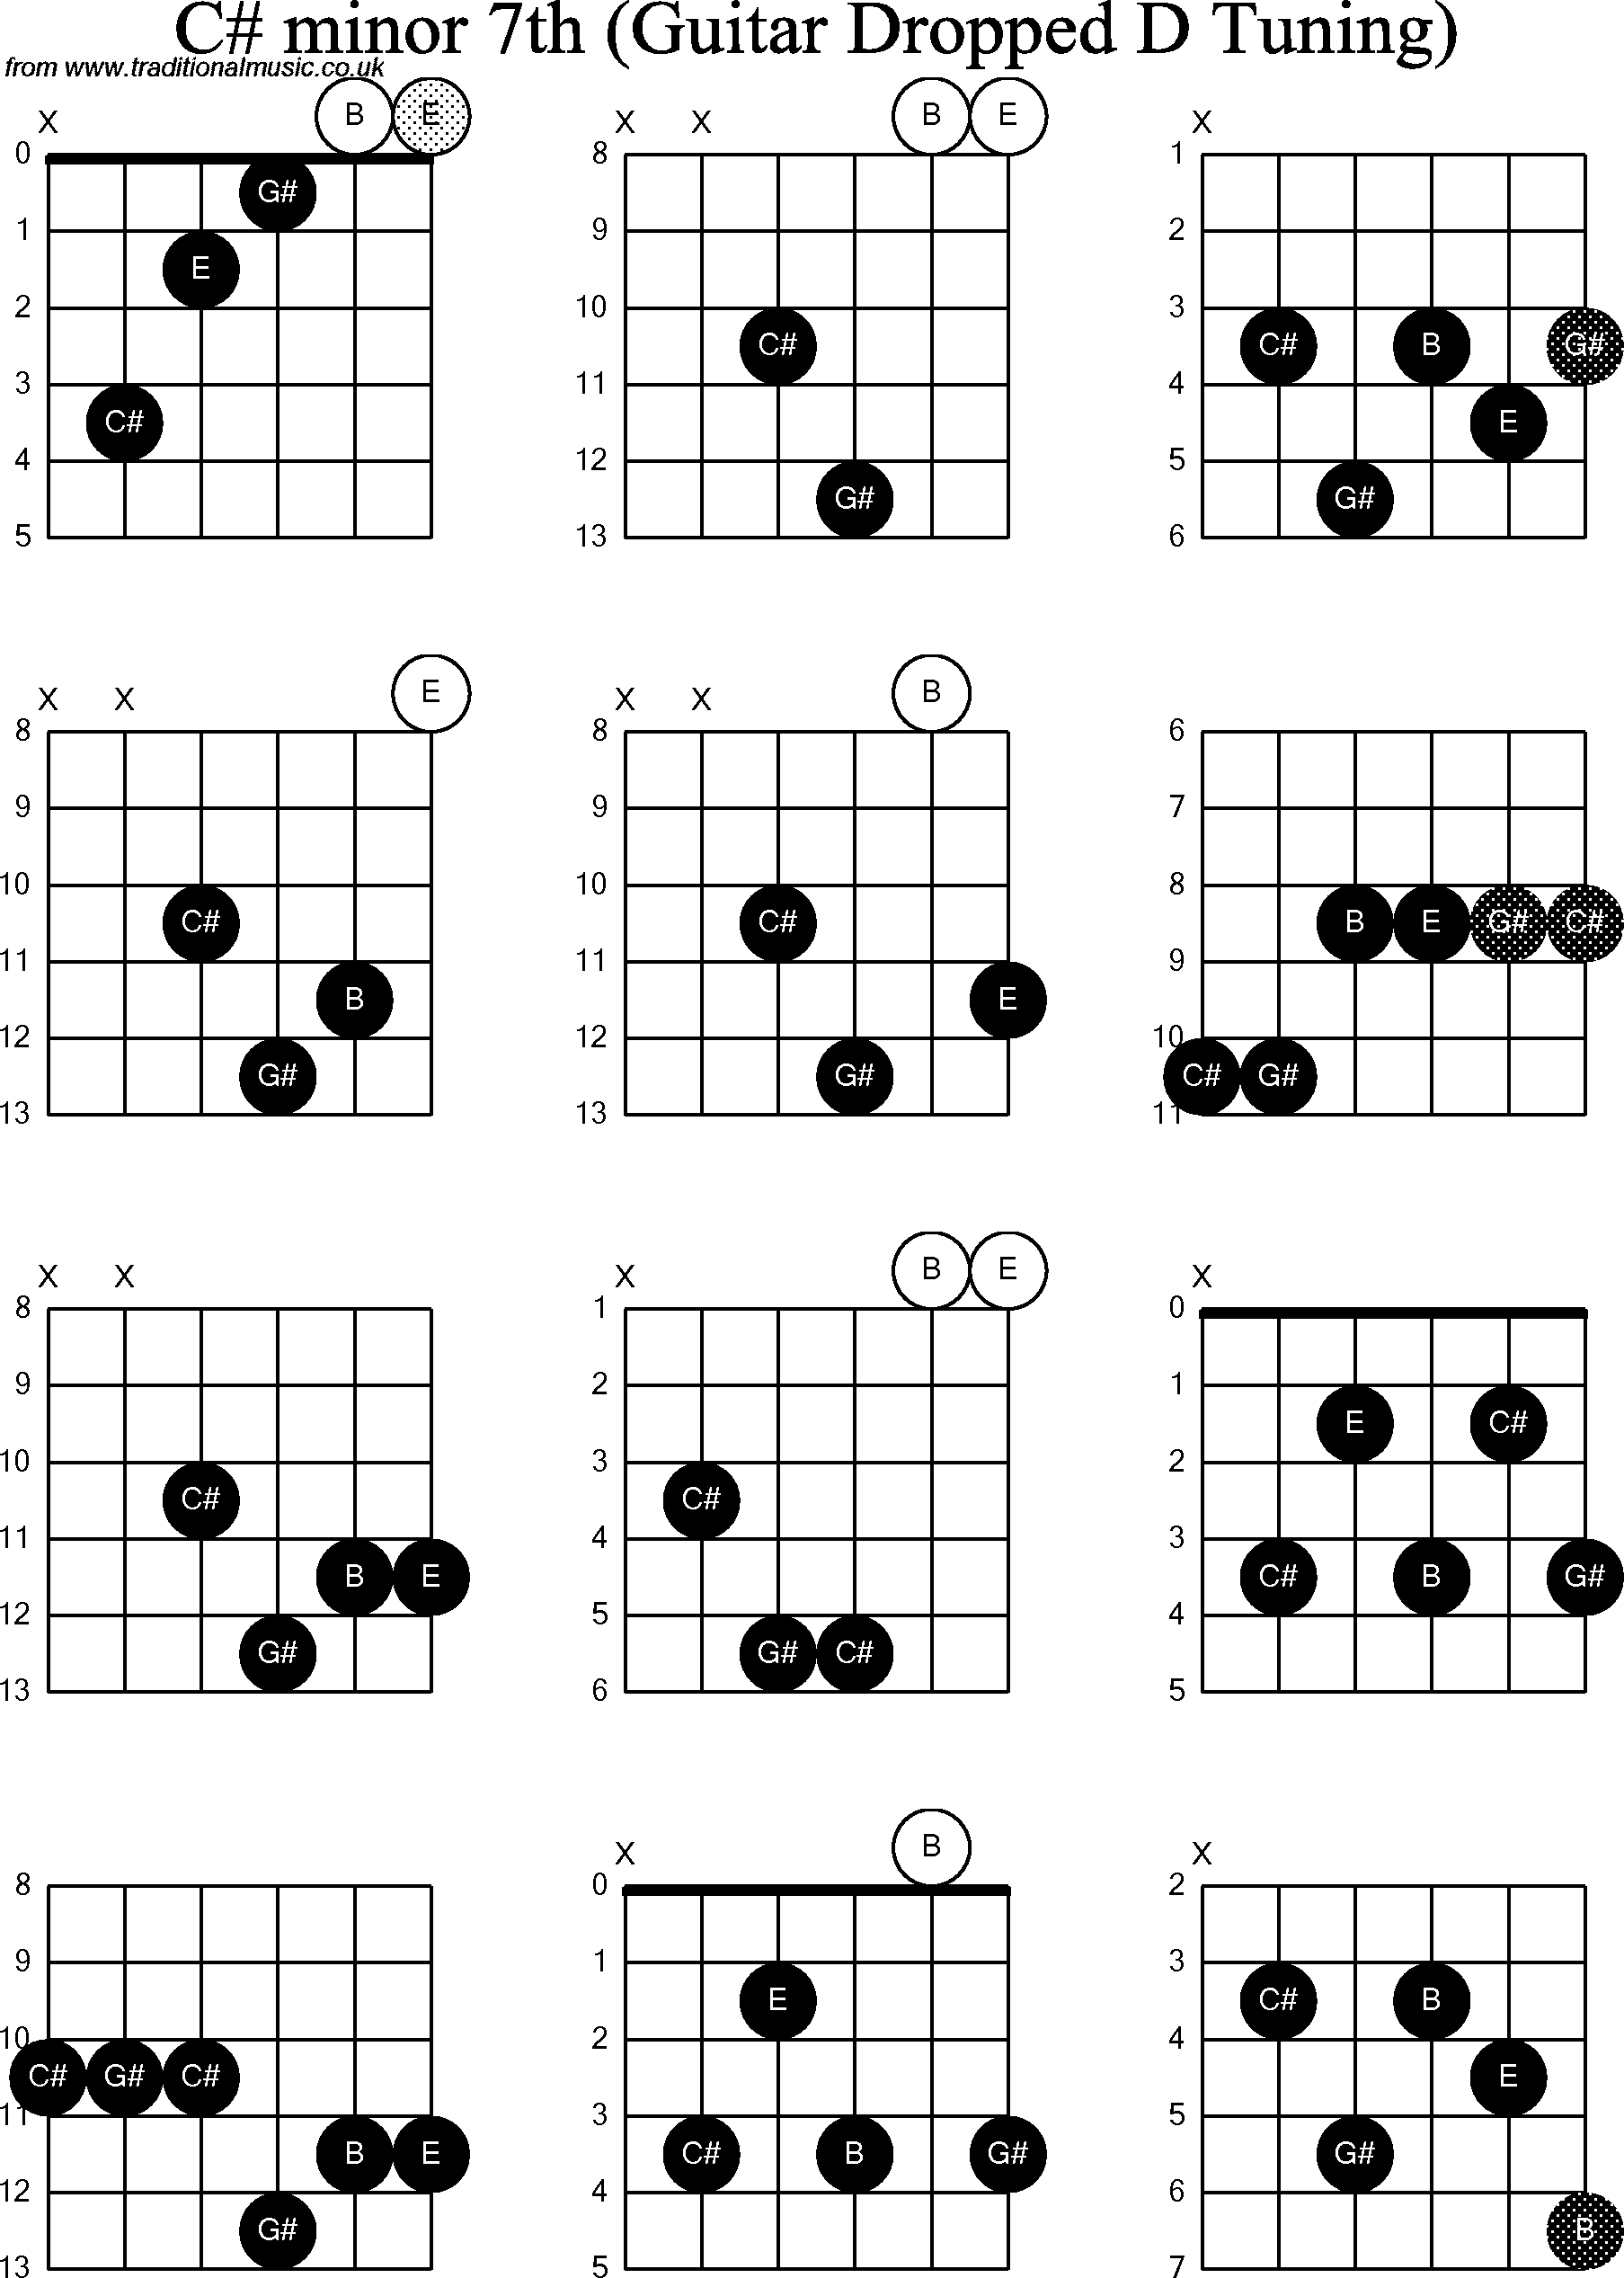 Chord Diagrams For Dropped D Guitar Dadgbe   C Sharp Minor7th